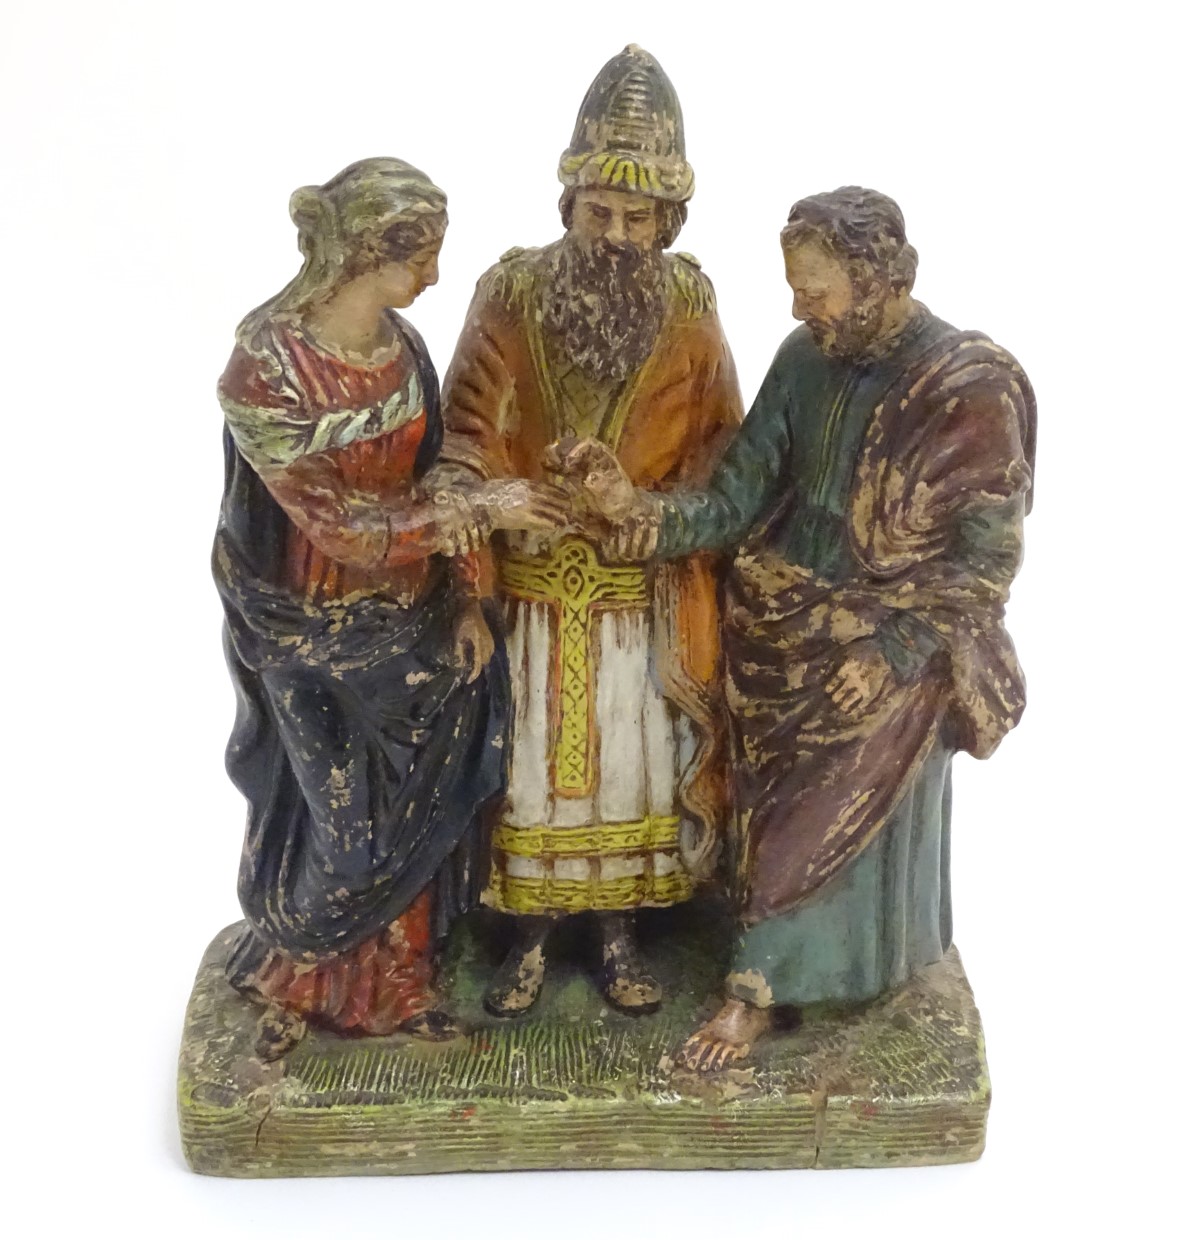 Judaica: A terracotta figural group of three people on a rectangular base,